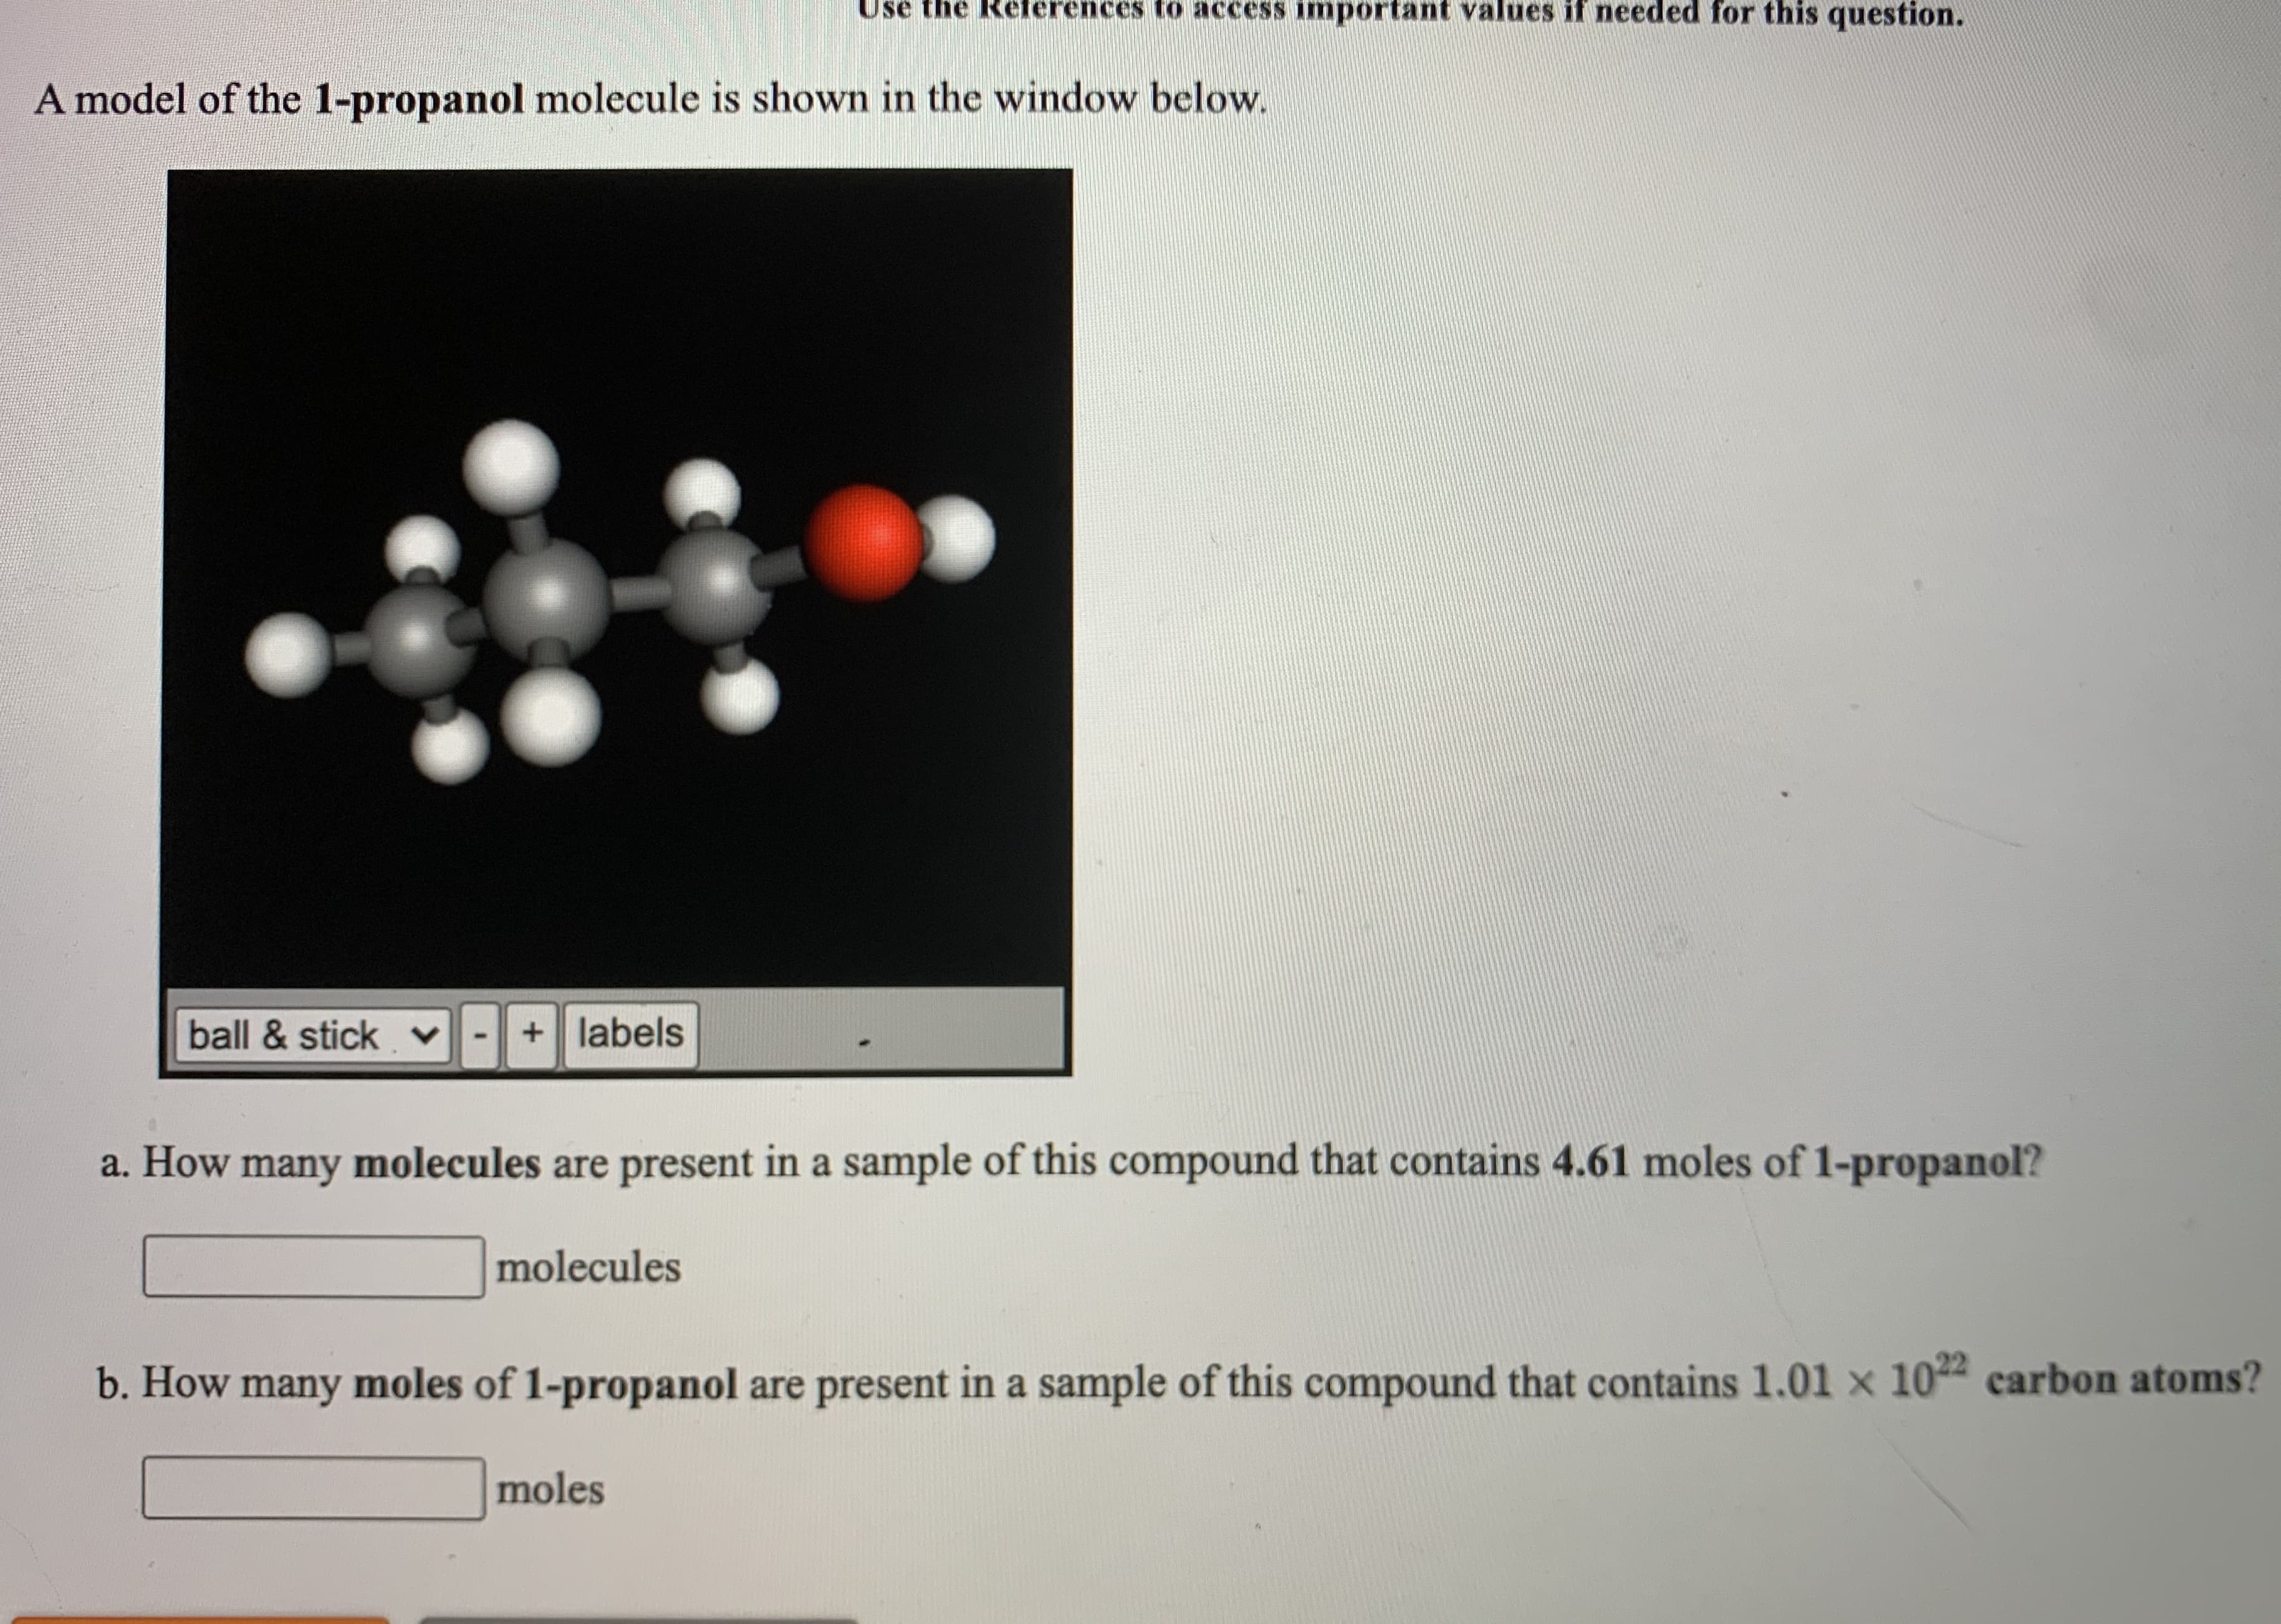 a. How many molecules are present in a sample of this compound that contains 4.61 moles of 1-propanol?
molecules
b. How many moles of 1-propanol are present in a sample of this compound that contains 1.01 x 104 carbon atoms?
